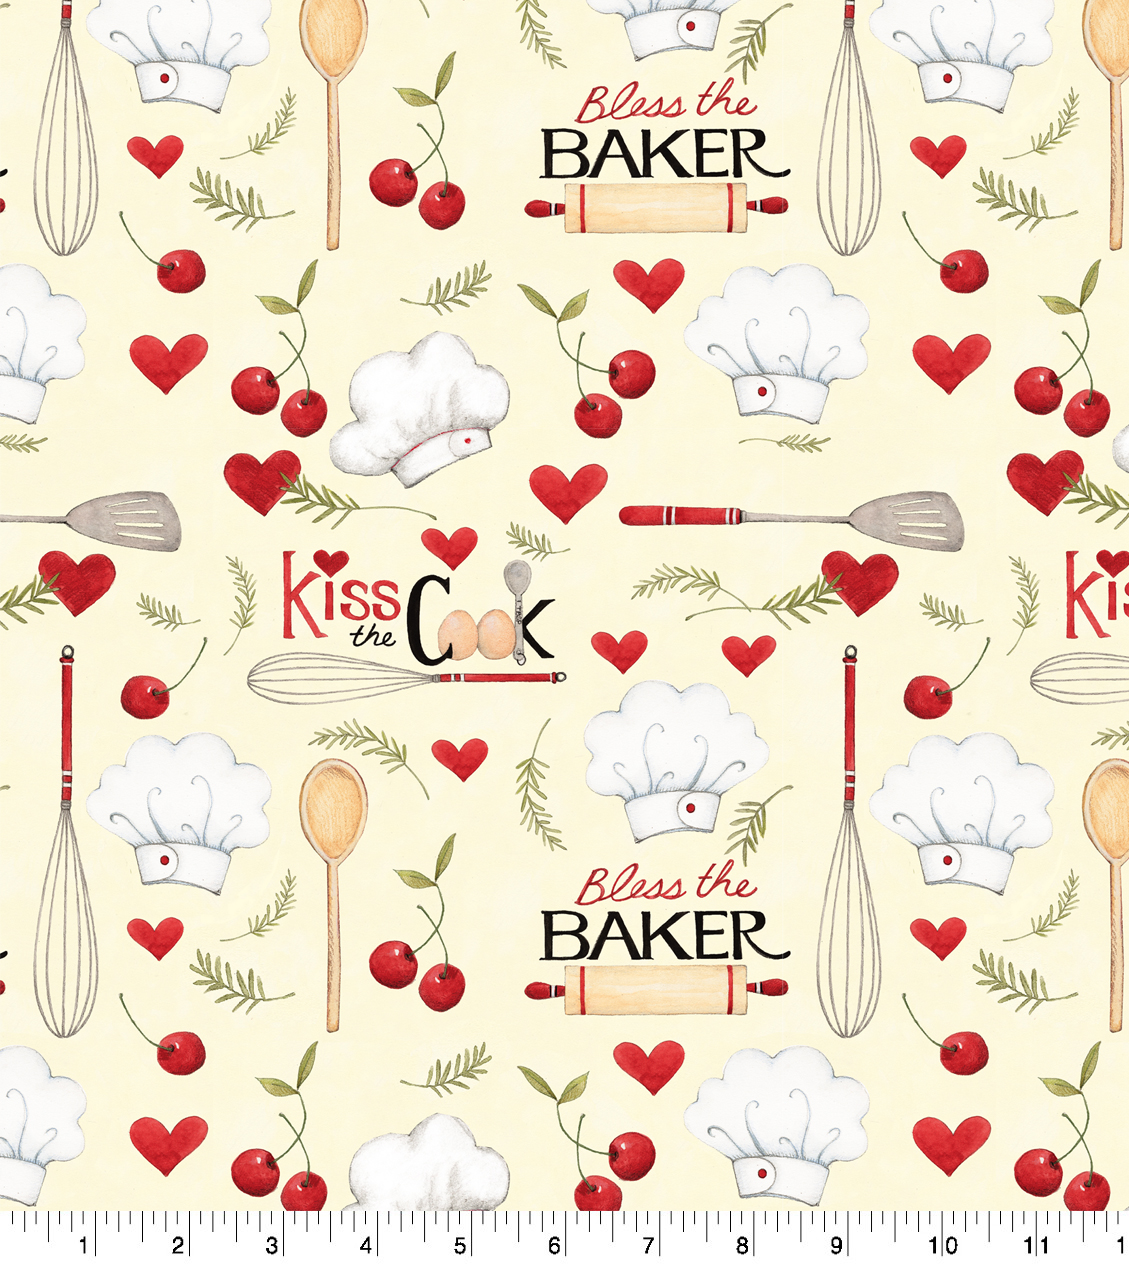 Springs Creative 44" x 36" Cotton Bless The Baker Precut Sewing & Craft Fabric, Cream - image 1 of 3